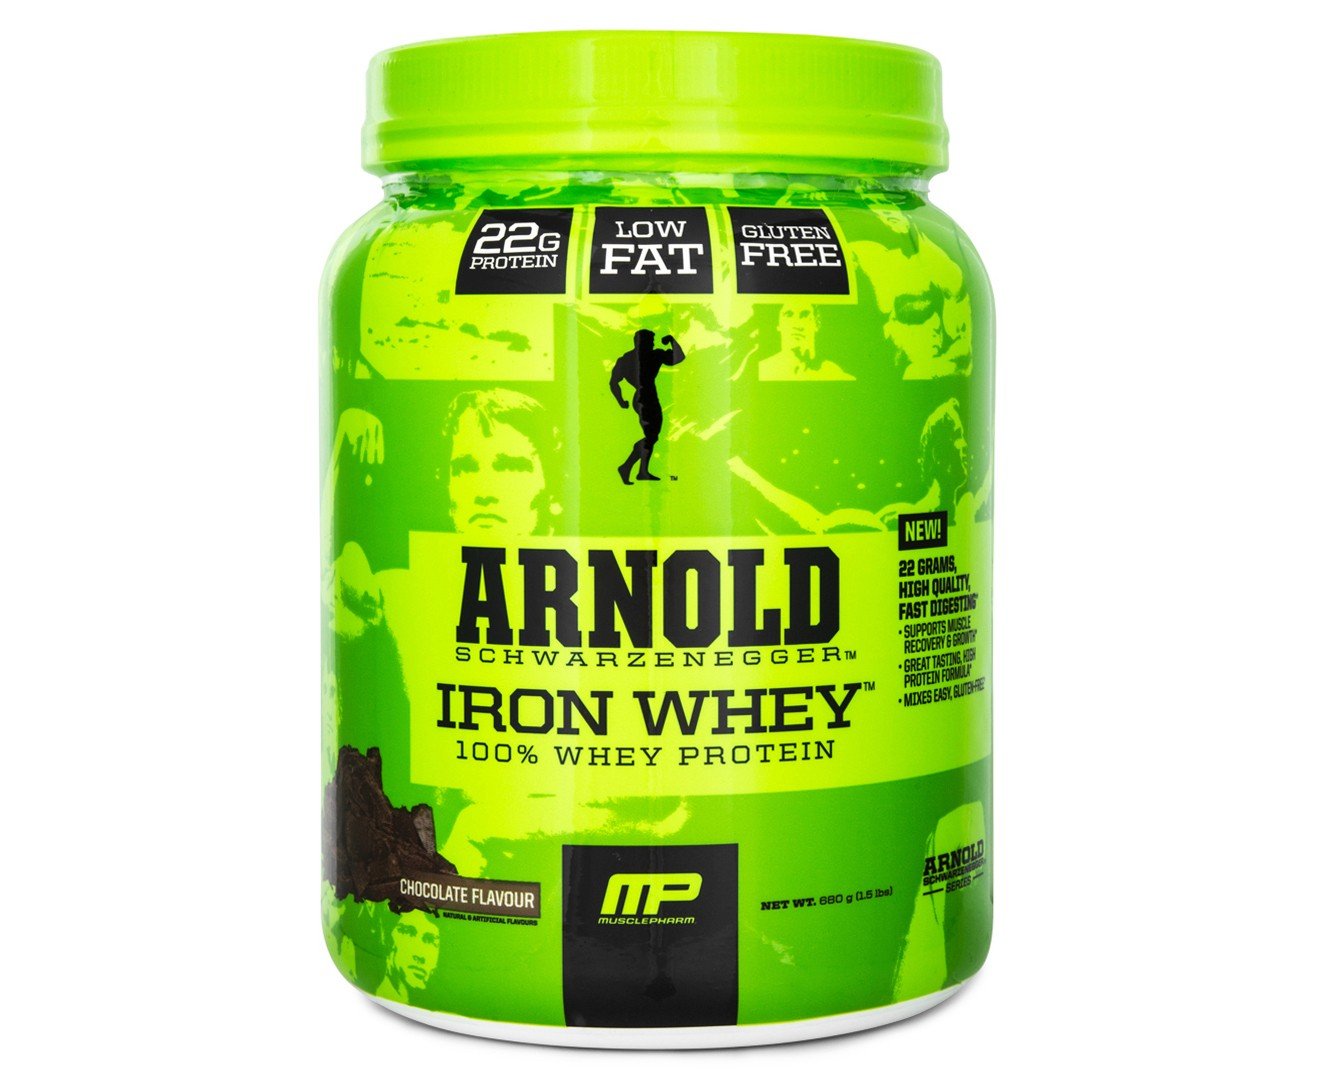 Arnold Series Iron Whey, 680 g, MusclePharm. Whey Protein Blend. 